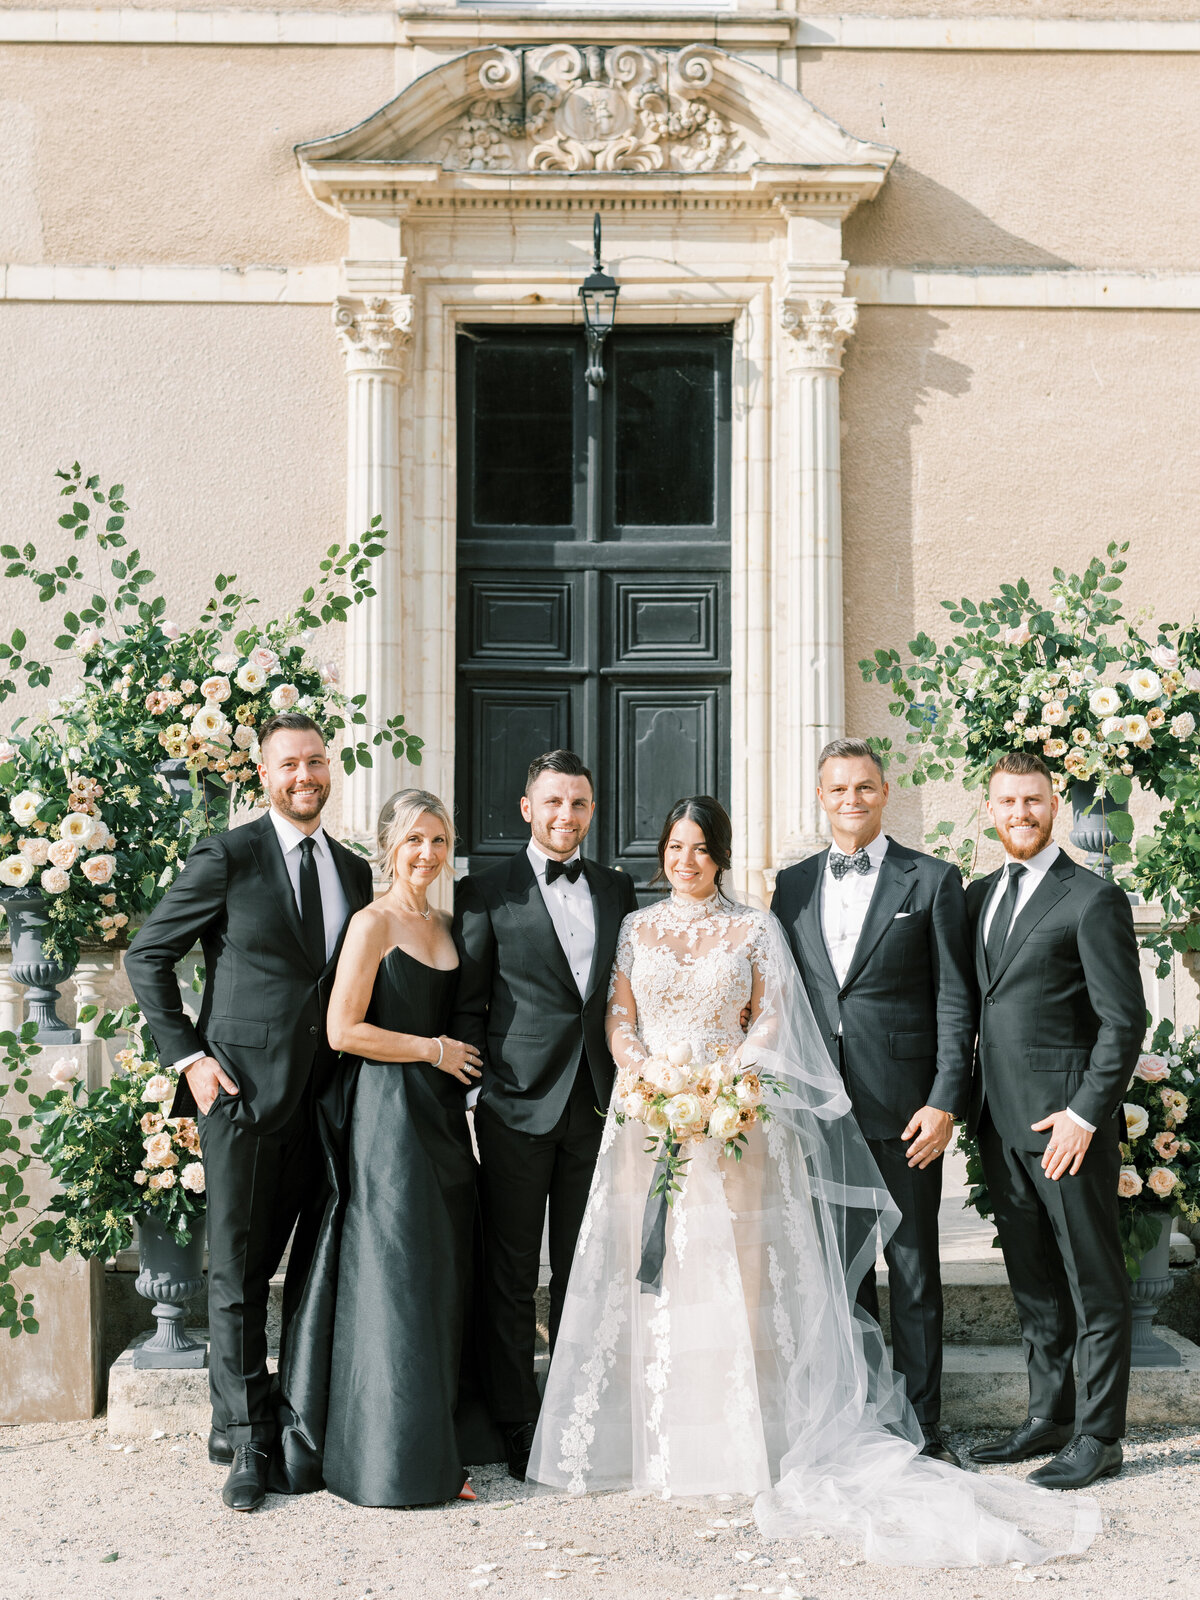 Jennifer Fox Weddings English speaking wedding planning & design agency in France crafting refined and bespoke weddings and celebrations Provence, Paris and destination Molly-Carr-Photography-Natalie-Ryan-Ceremony-16_ia9